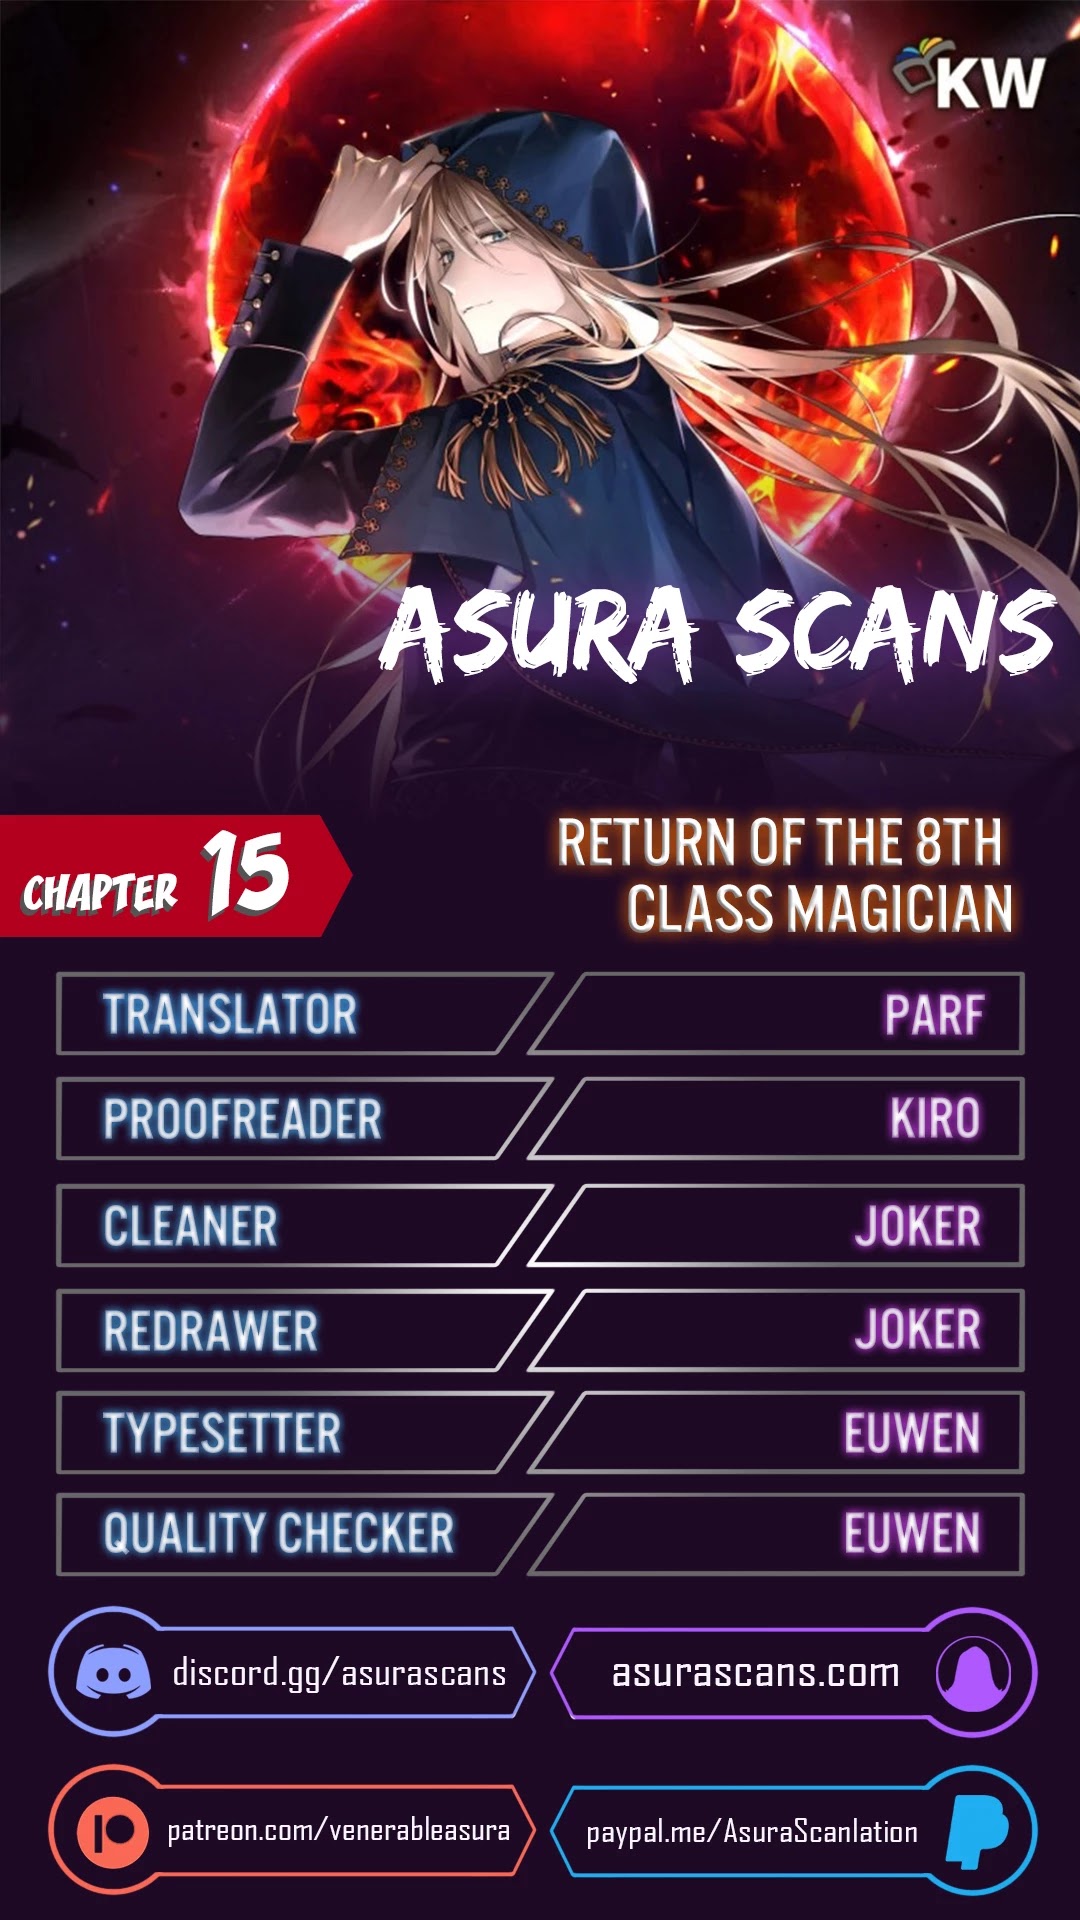 Return of the 8th class Magician chapter 15